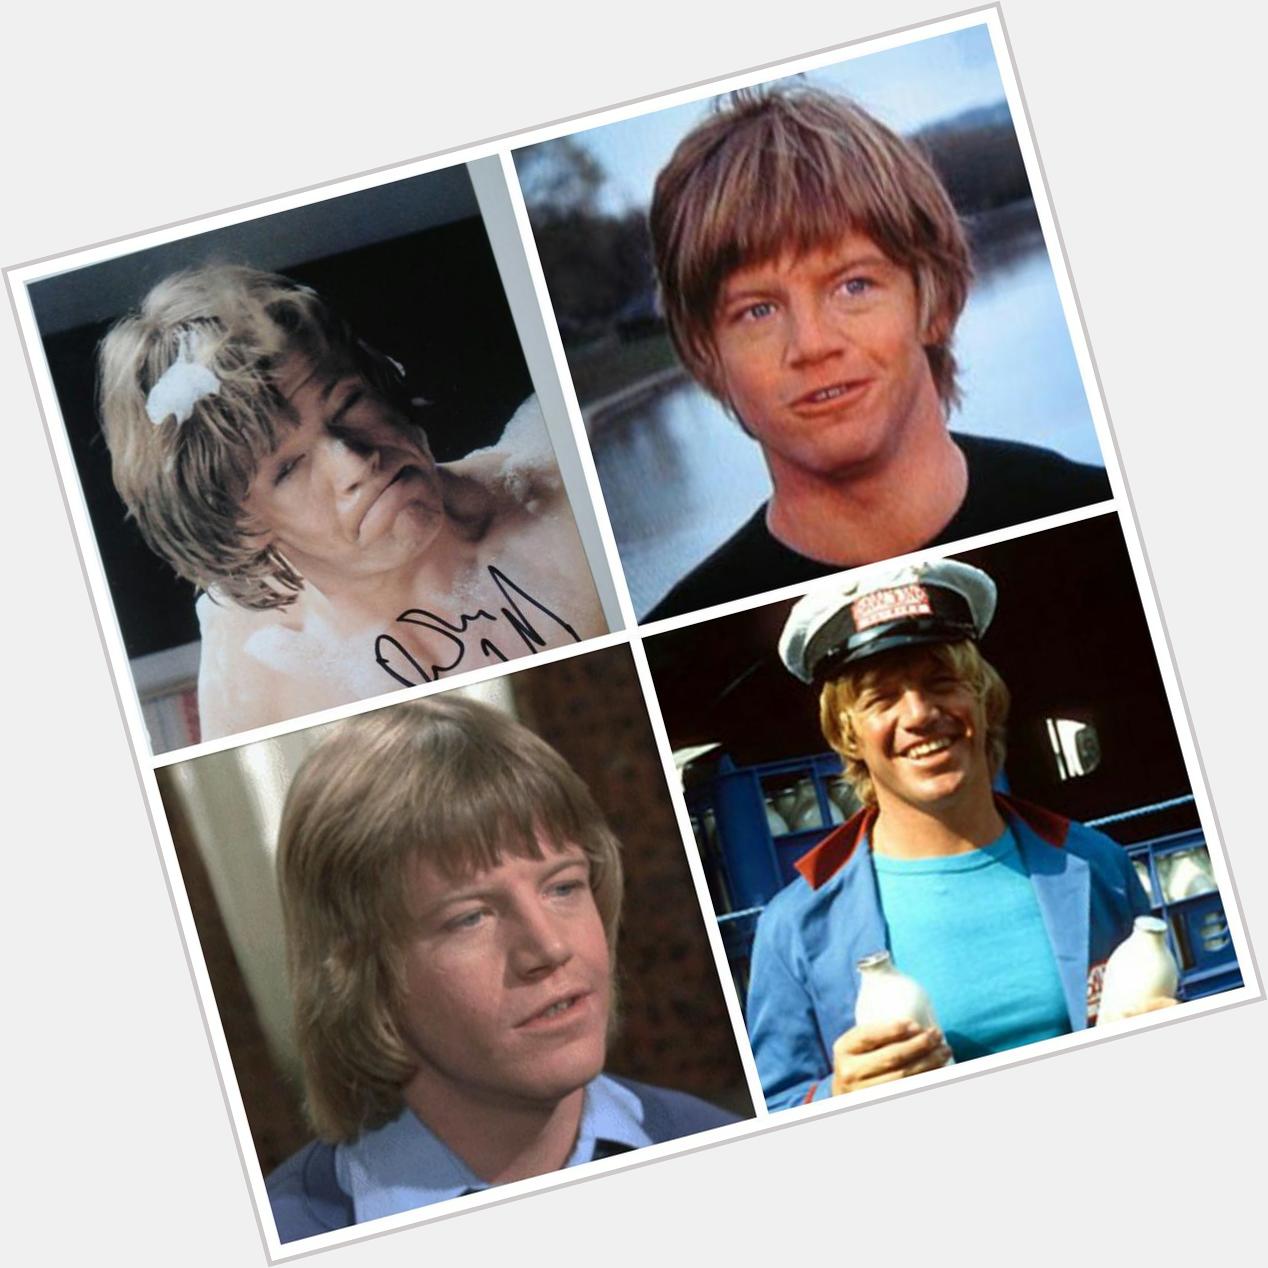 Robin Askwith is 65 today, Happy Birthday Robin!! 